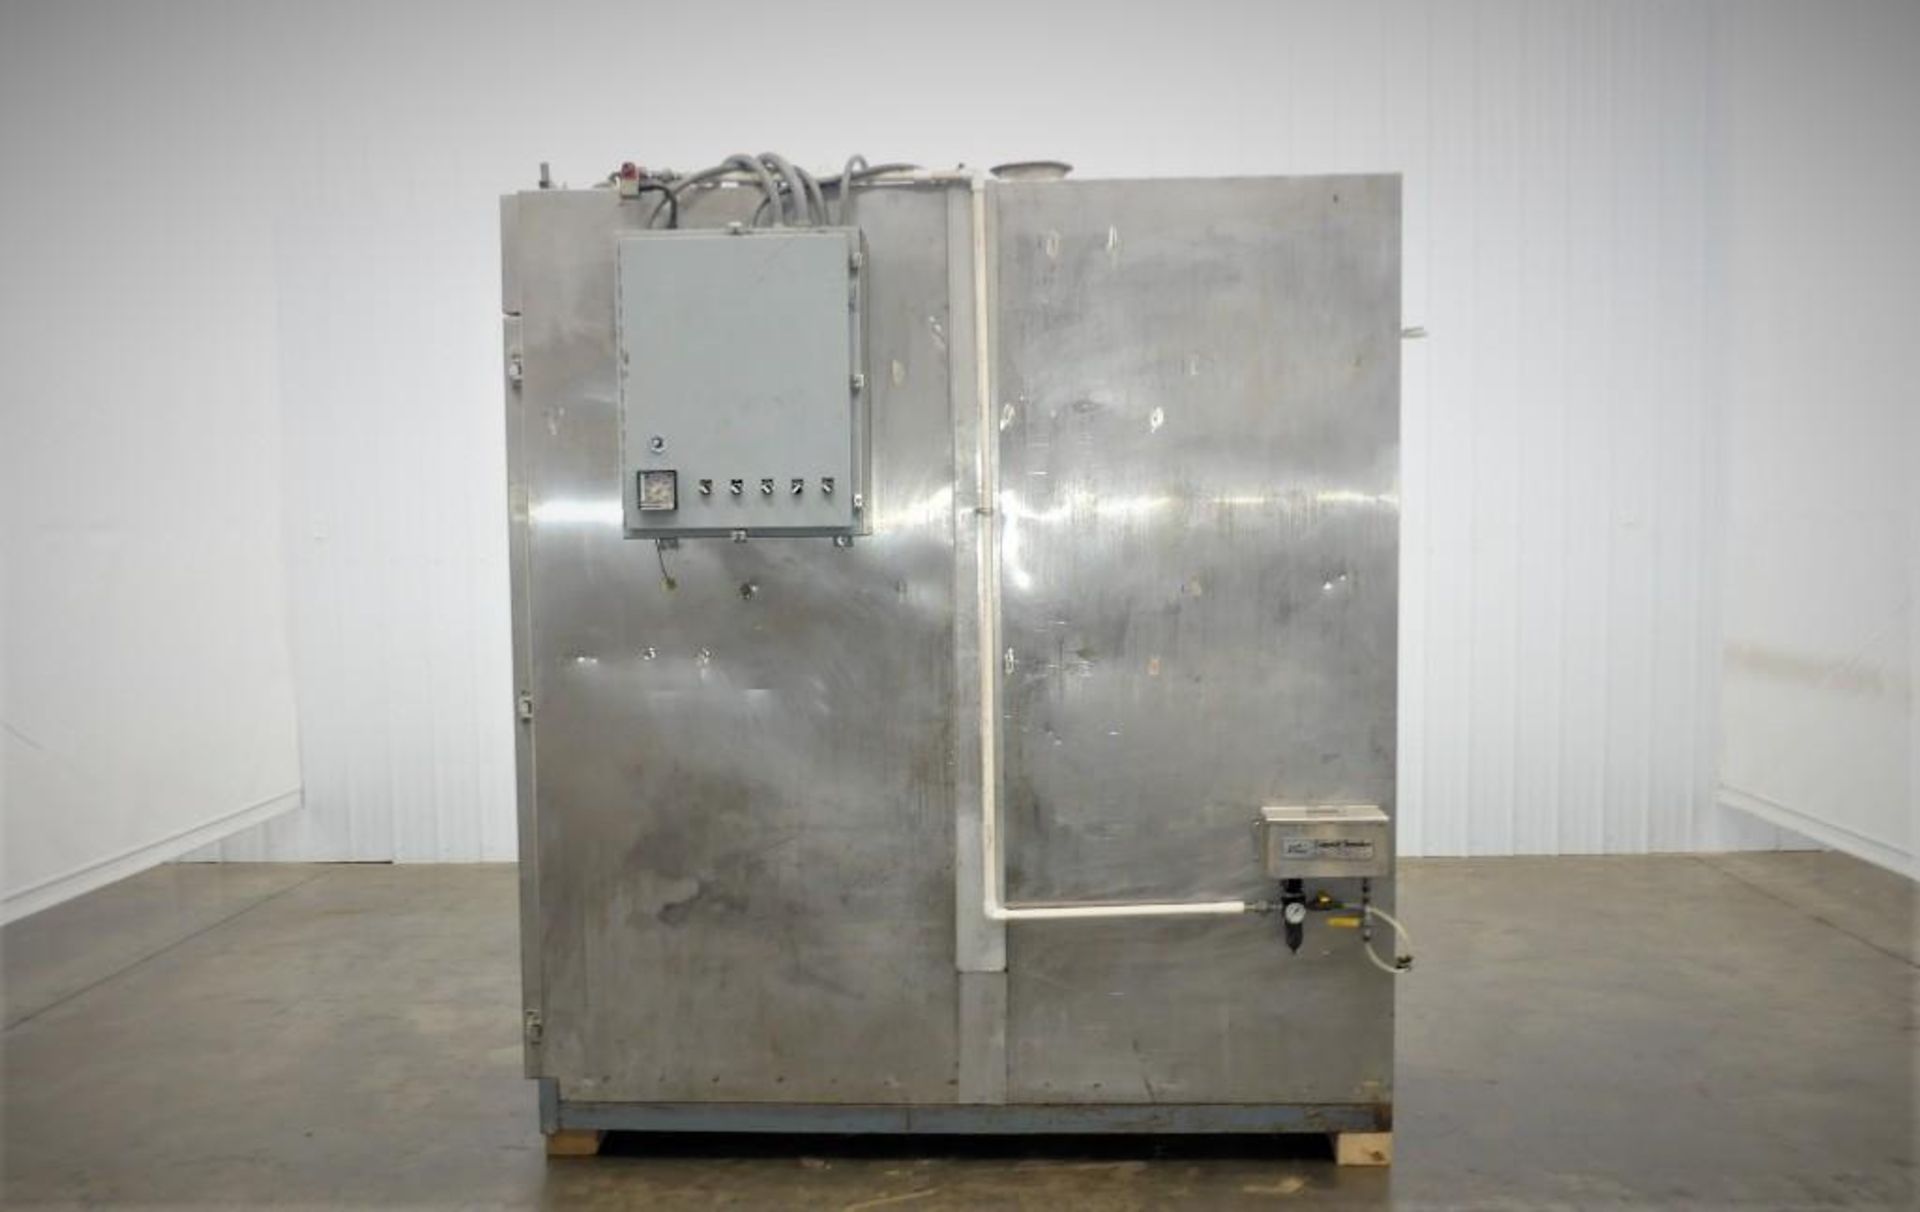 Maurer & Sohne Two Truck Stainless Smokehouse - Image 2 of 10